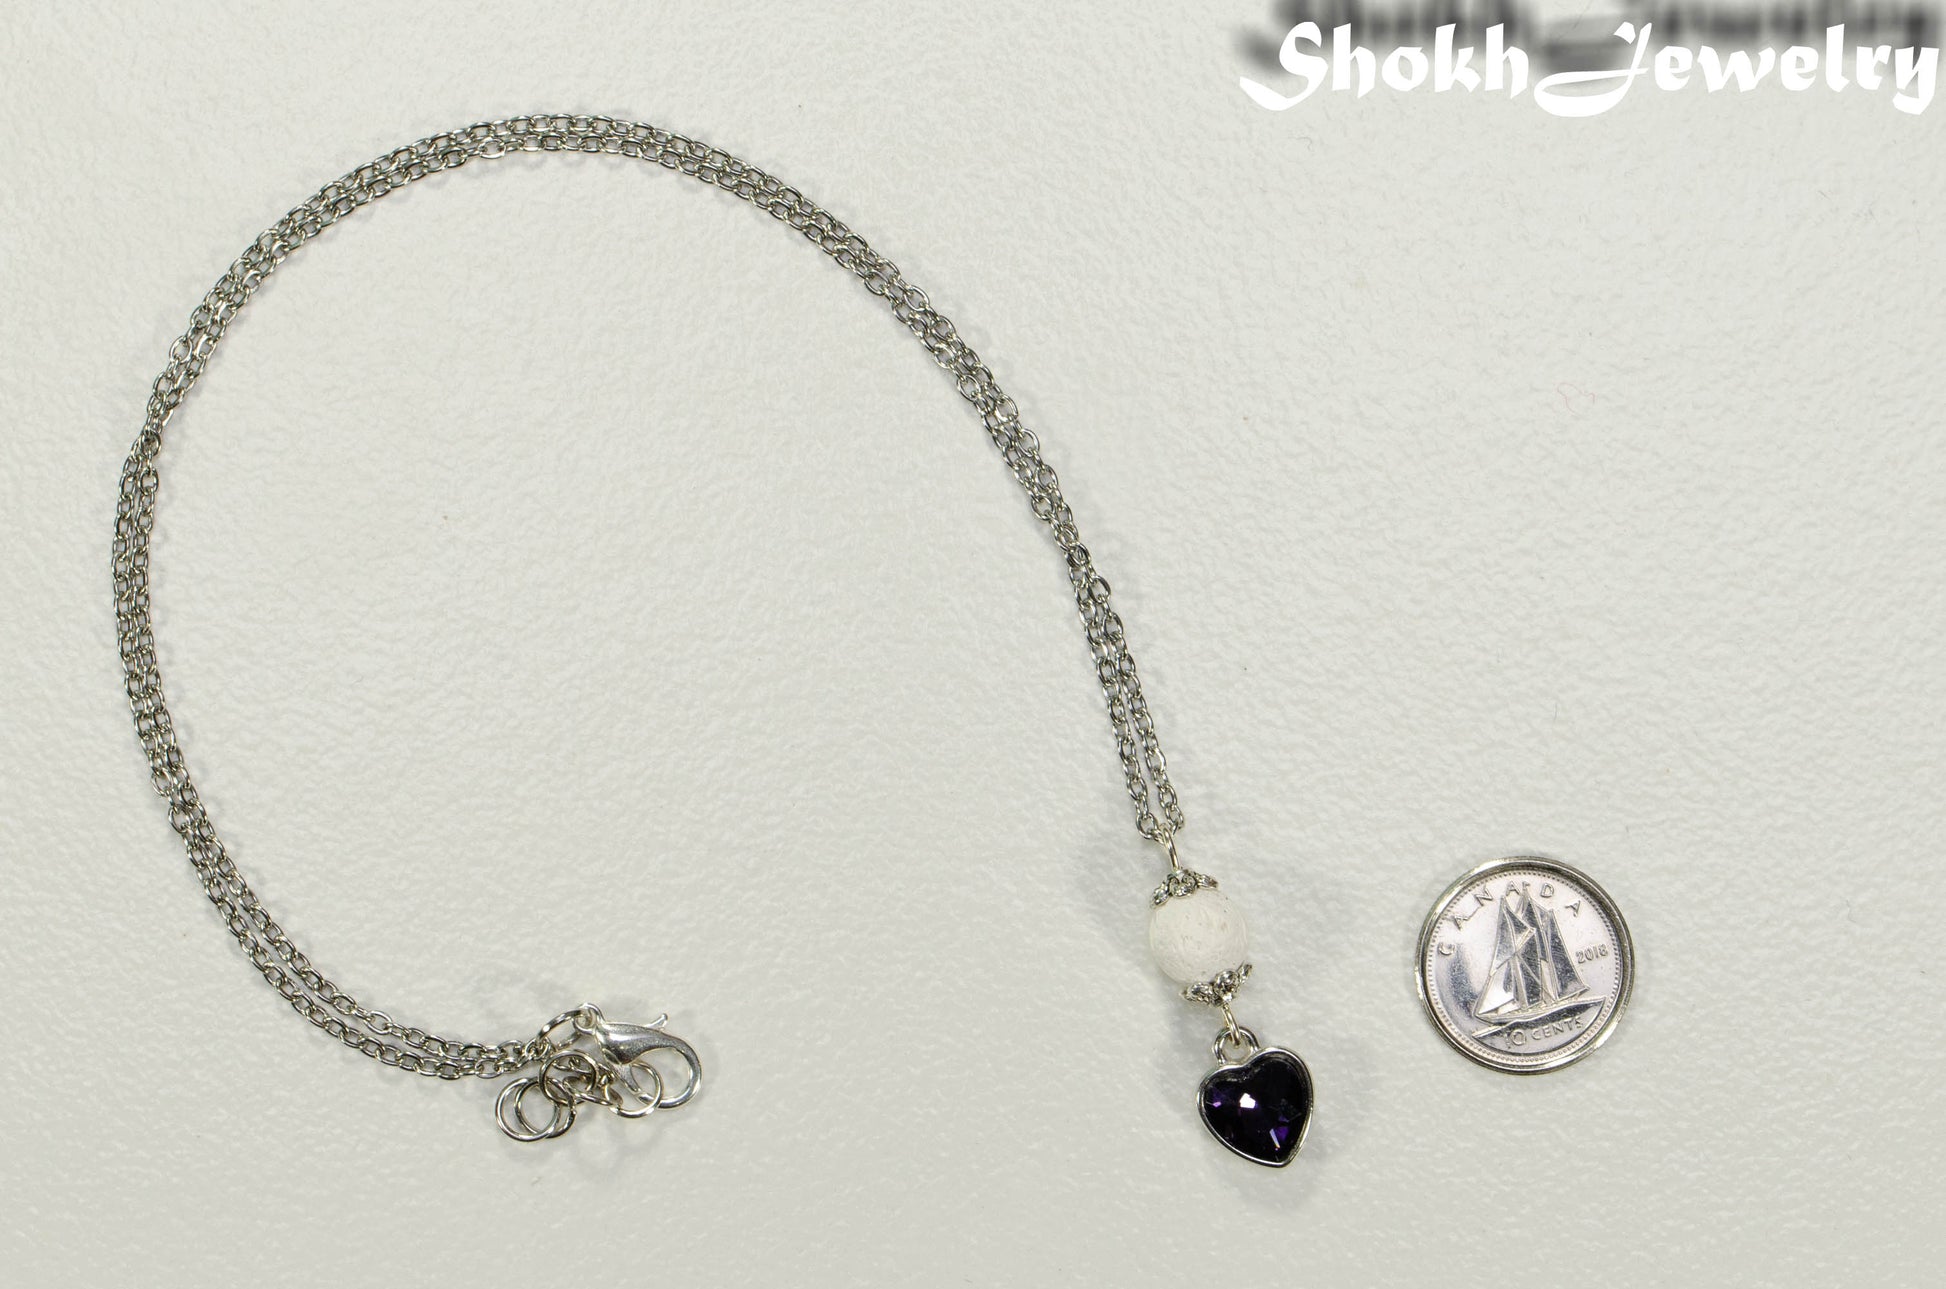 Lava Rock and Heart Shaped February Birthstone Choker Necklace beside a dime.